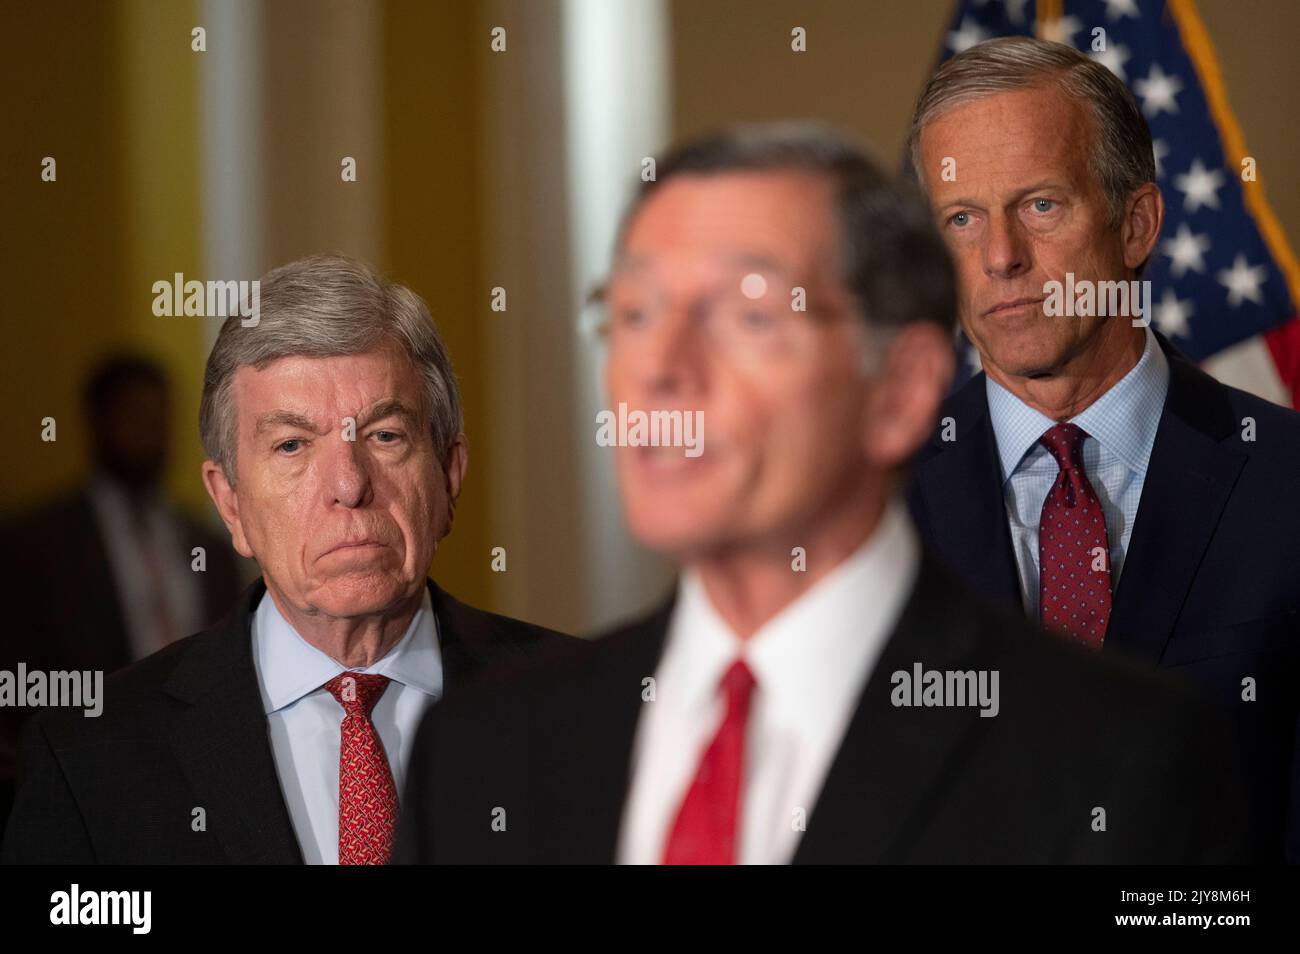 United States Senator John Thune (Republican of South Dakota), right, and United States Senator Roy Blunt (Republican of Missouri), left, look on as United States Senator John Barrasso (Republican of Wyoming) offers remarks during the Senate Republican's policy luncheon press conference, at the US Capitol in Washington, DC, Wednesday, September 7, 2022. Credit: Cliff Owen/CNP /MediaPunch Stock Photo